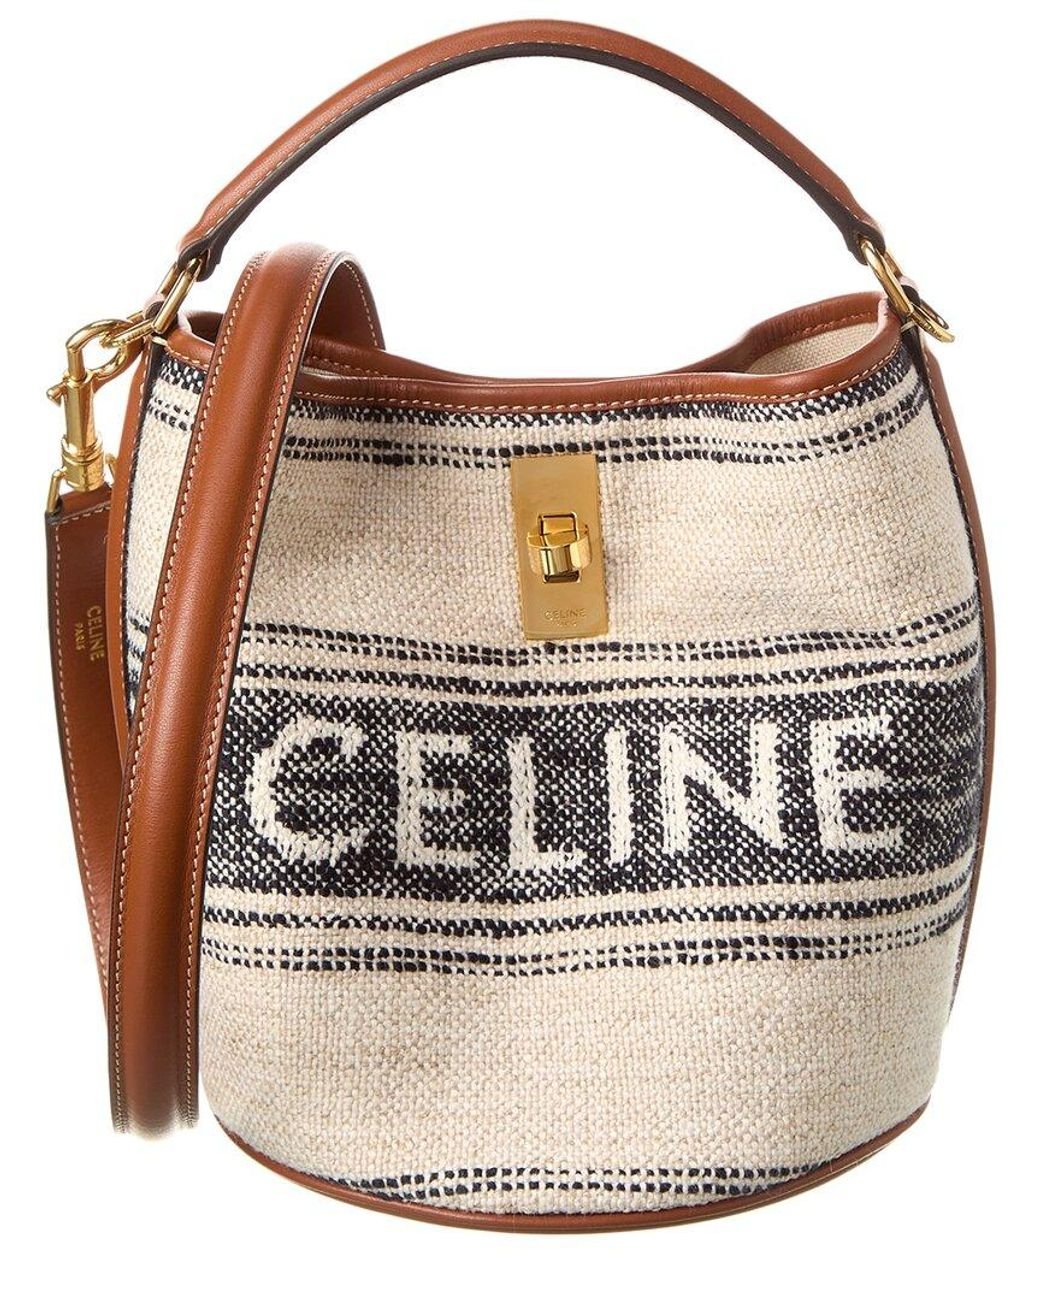 Celine Teen 16 Jacquard Canvas & Leather Bucket Bag in White